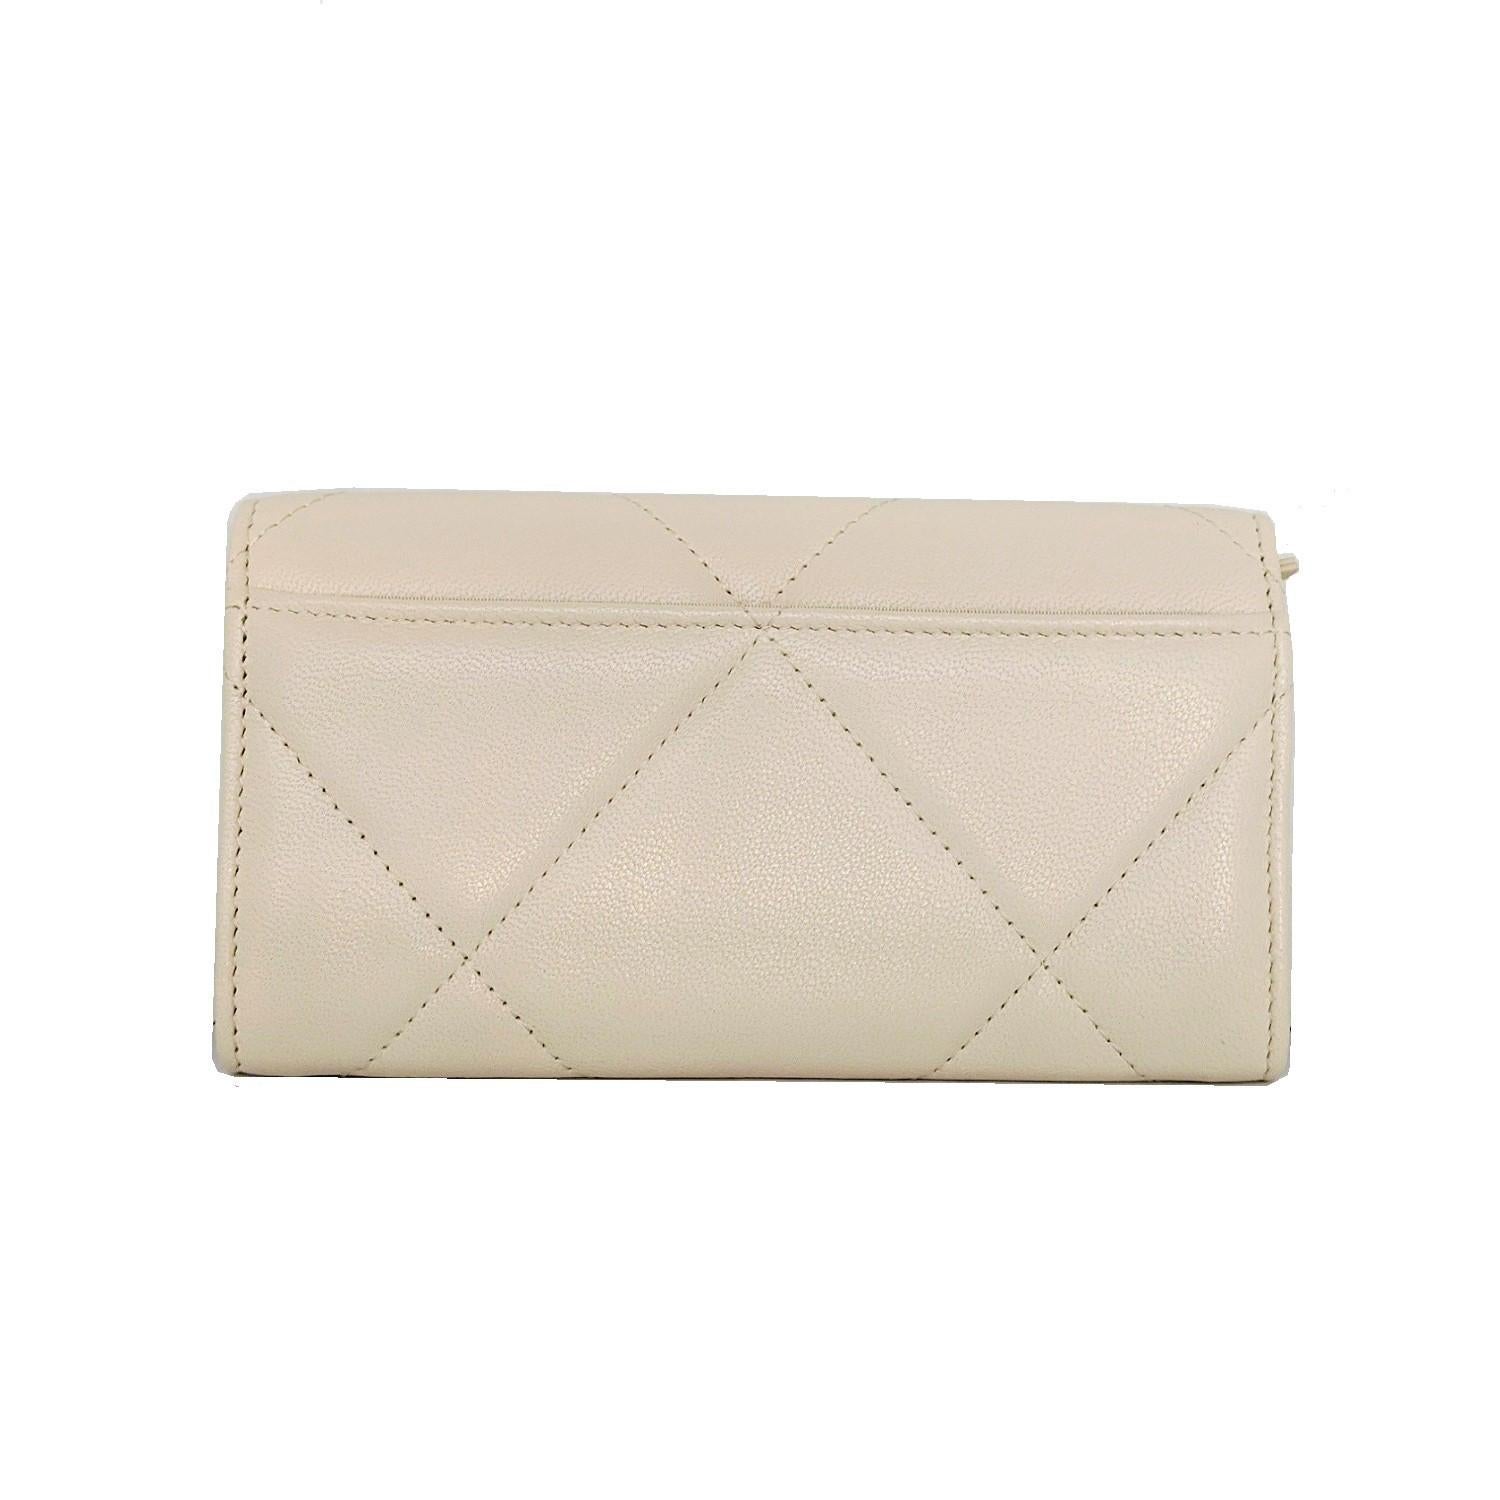 This stylish wallet is crafted of luxurious diamond quilted calfskin leather in light beige with an aged brass Chanel CC logo. The wallet opens to a matching leather interior with card slots and a zippered compartment. This is a perfect wallet,